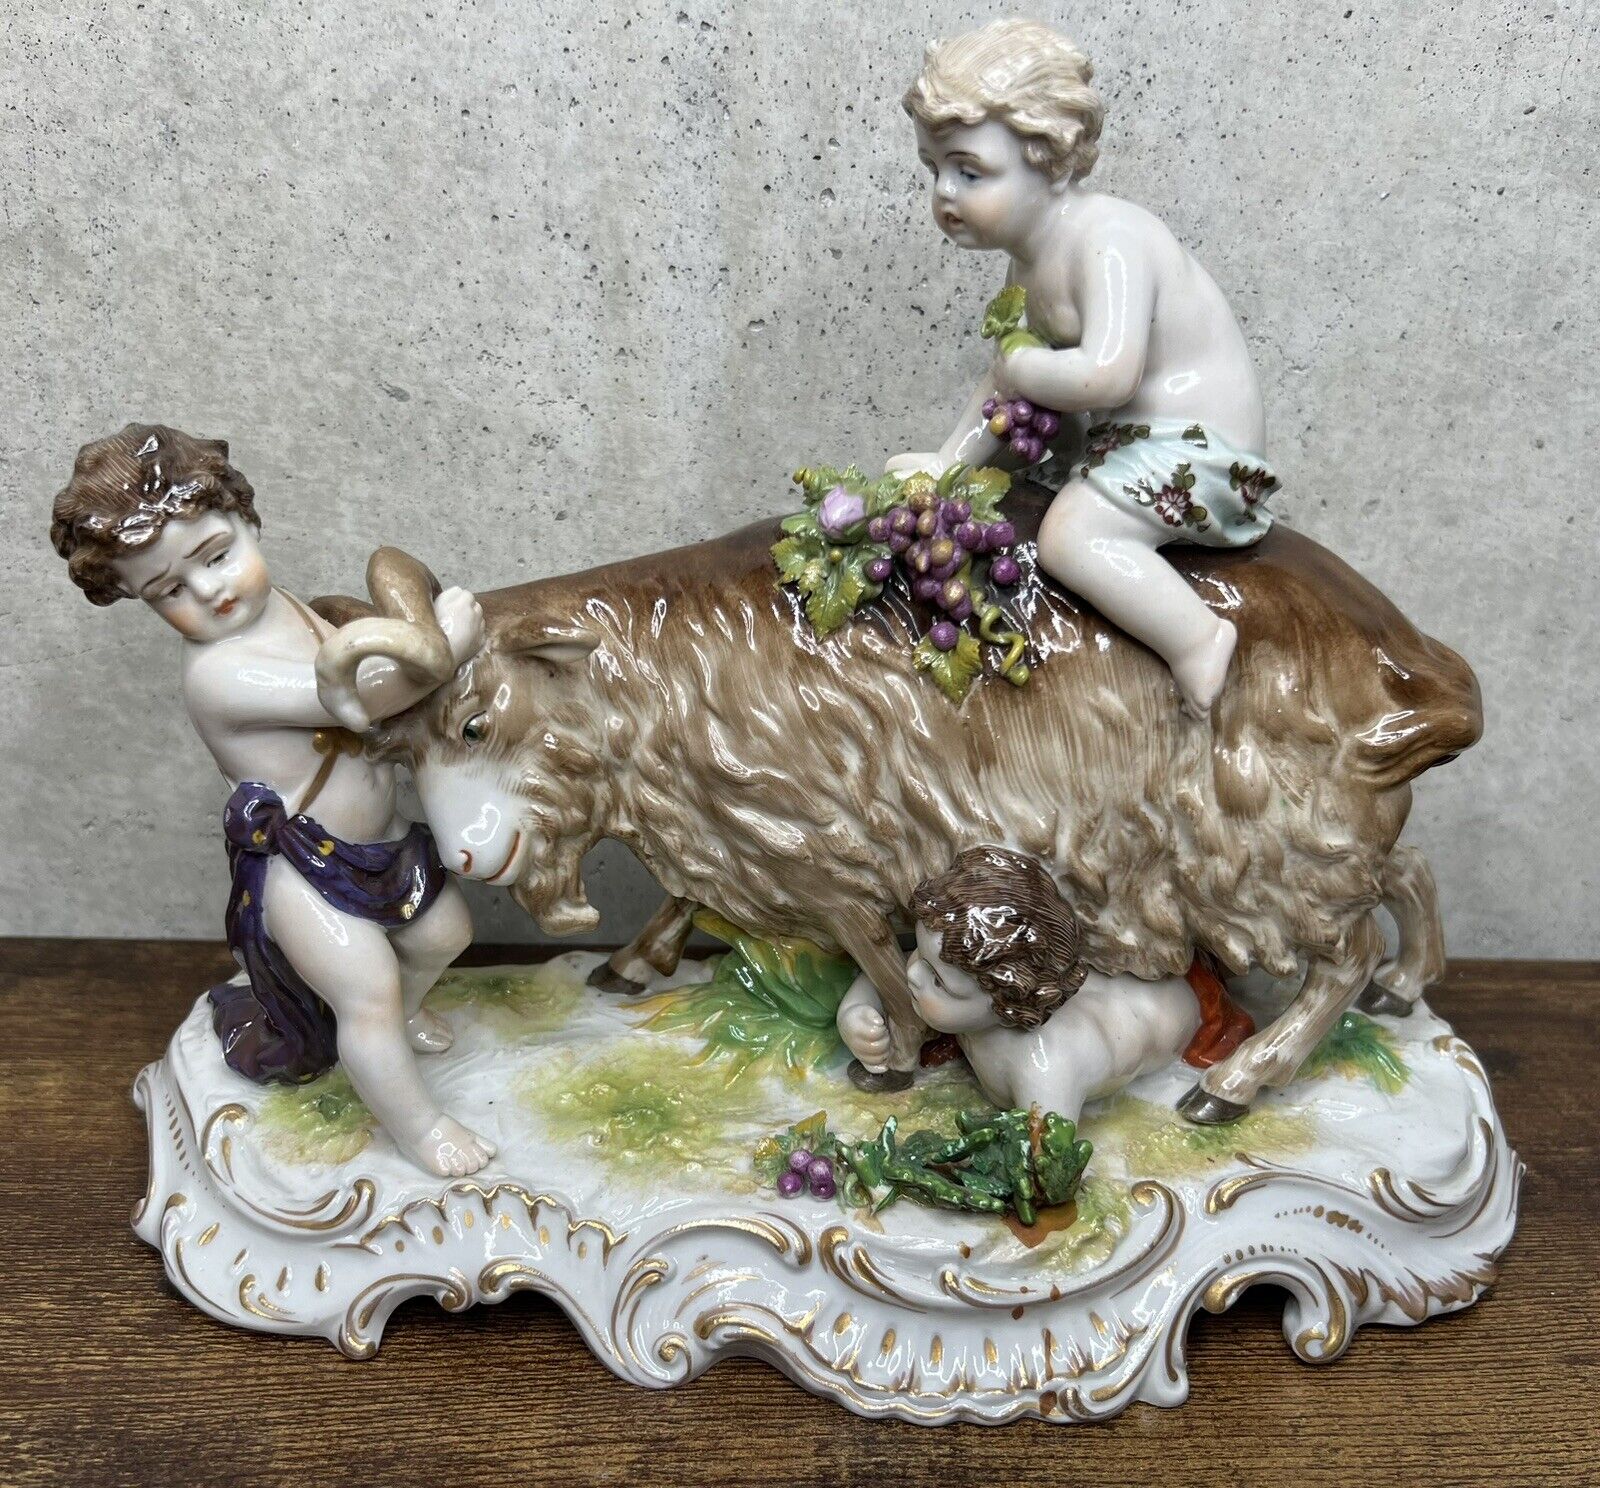 Antique Ludwigsburg Porcelain Figure Group Goat With Children Amazing Quality